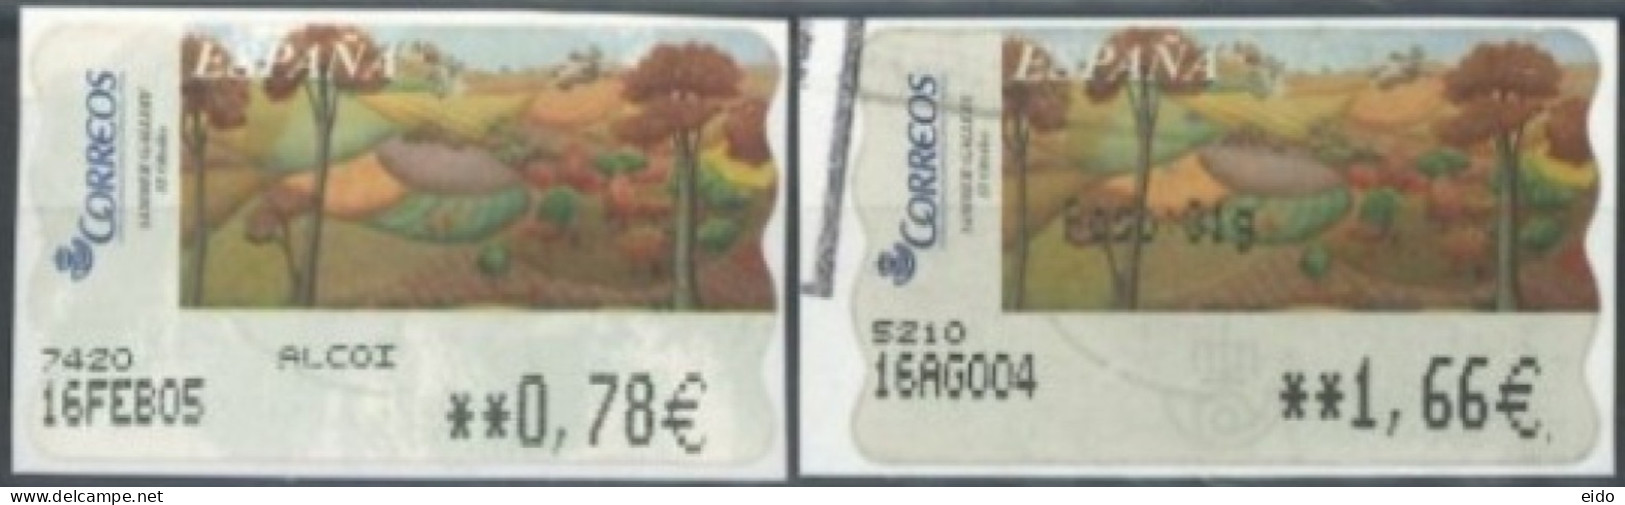 SPAIN - 2004/05 -  SAMER GALLERY, VERANO STAMPS LABELS SET OF 2 OF DIFFERENT VALUES, USED . - Usati